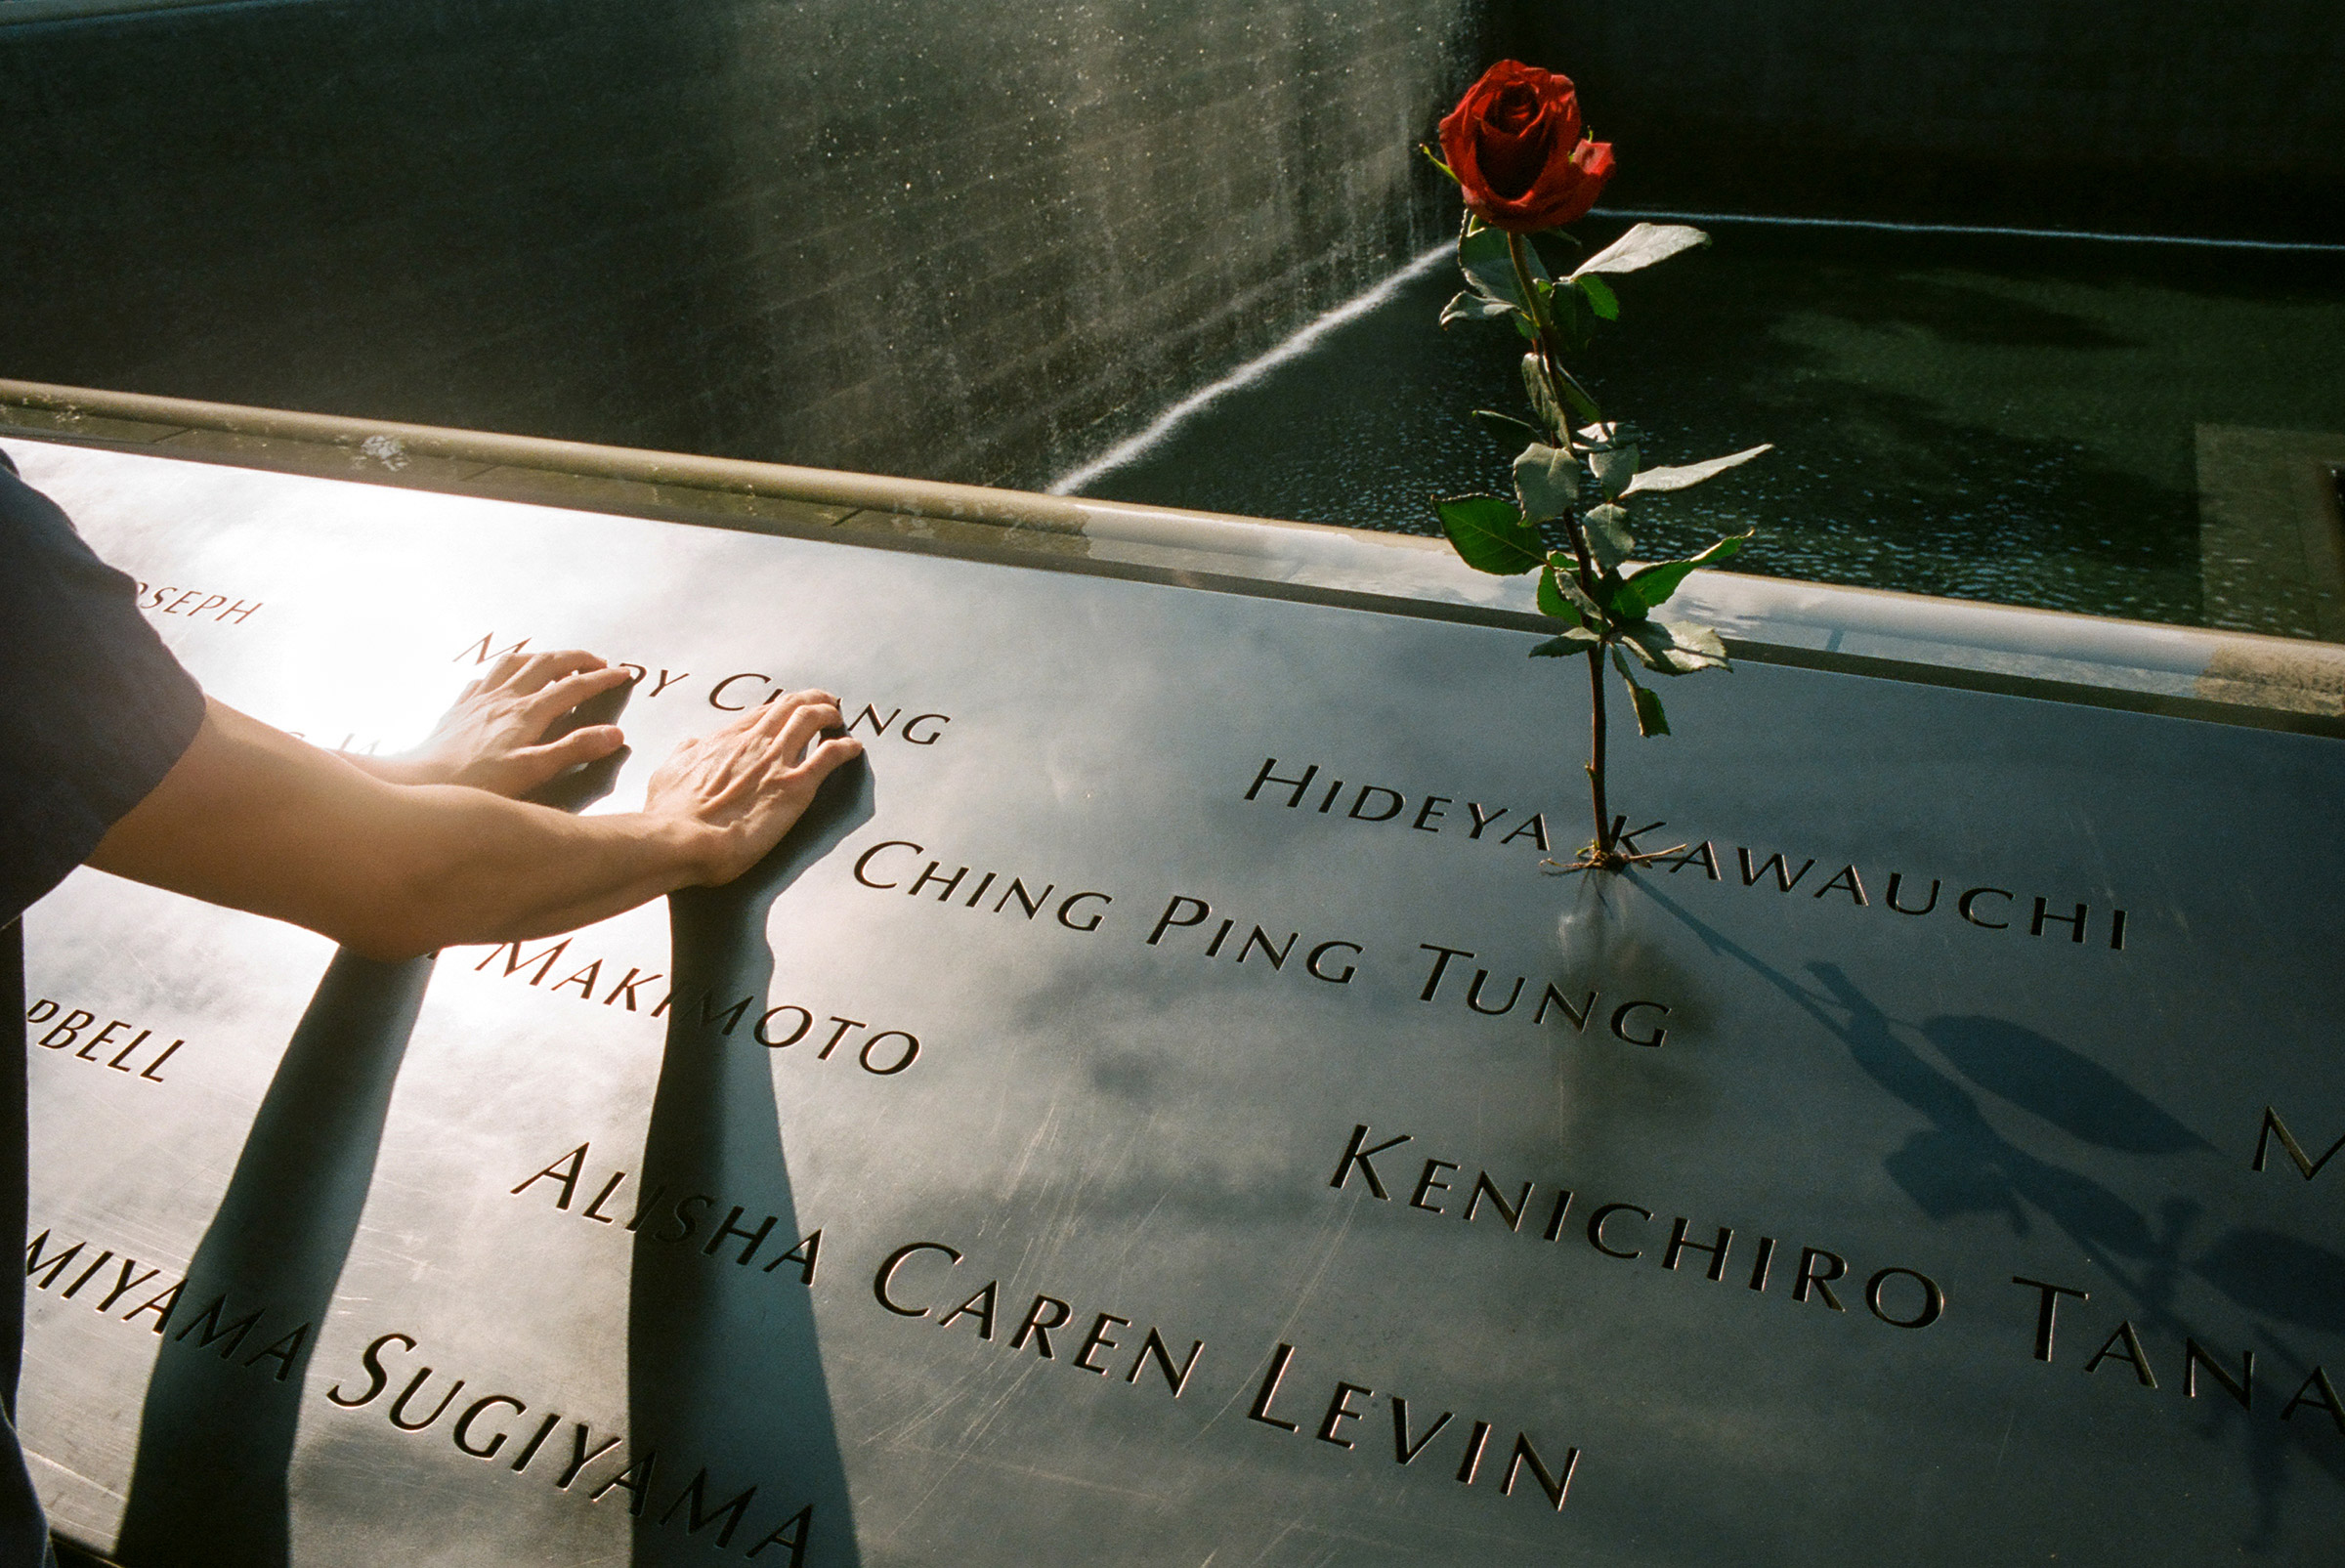 A mourner clings to the name of a lost loved one at the 9/11 memorial, Sept. 11, 2020. (Daniel Arnold)